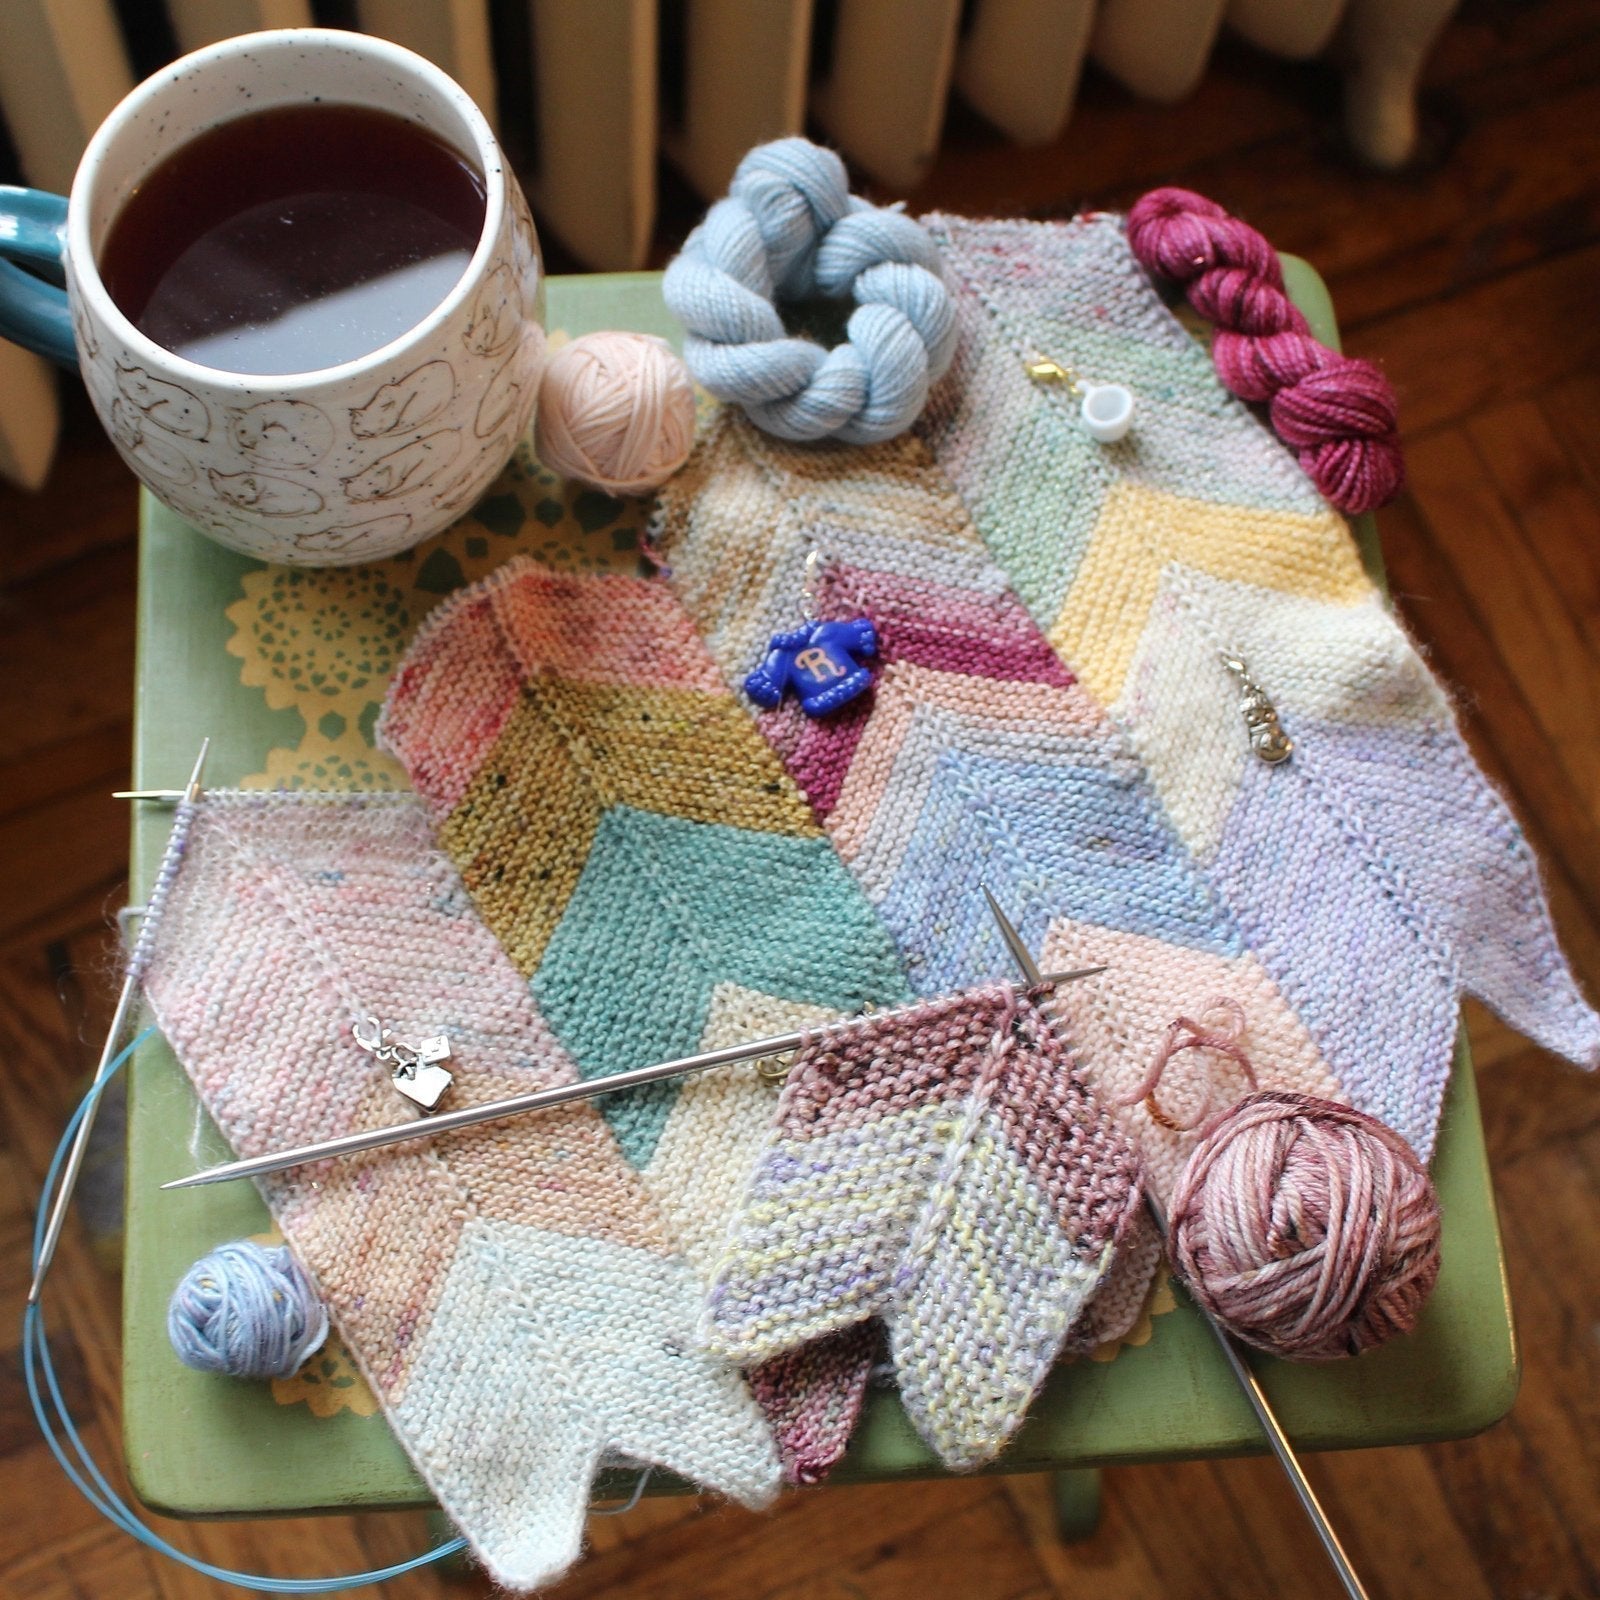 Blanket yarn: what to buy and how to use it - Gathered